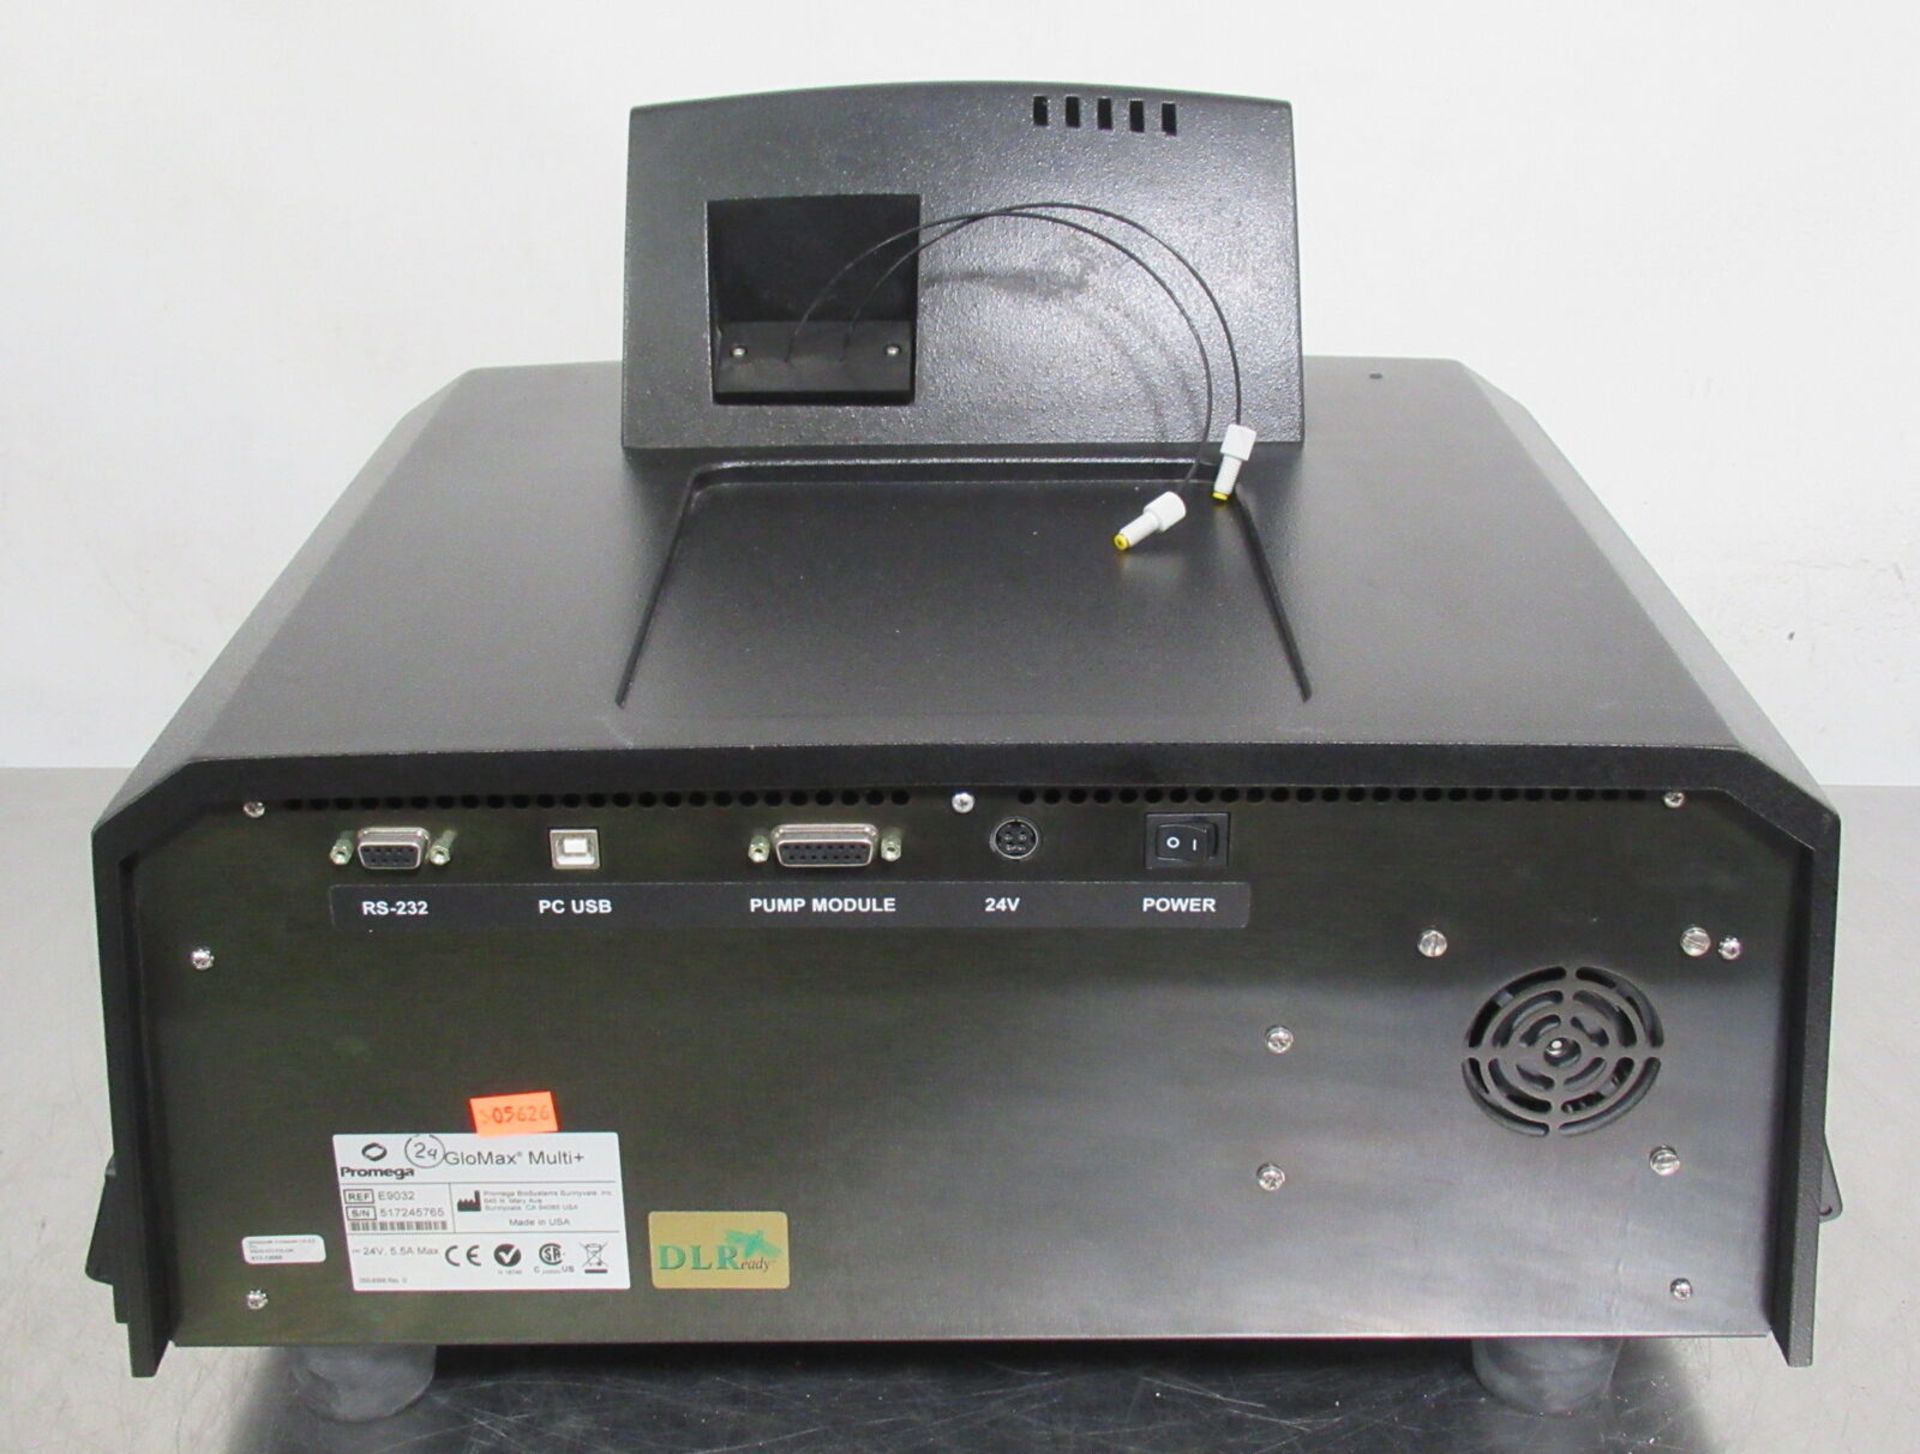 Promega GloMax Multi+ Detection System Plate Reader E9032 - Gilroy - Image 10 of 12